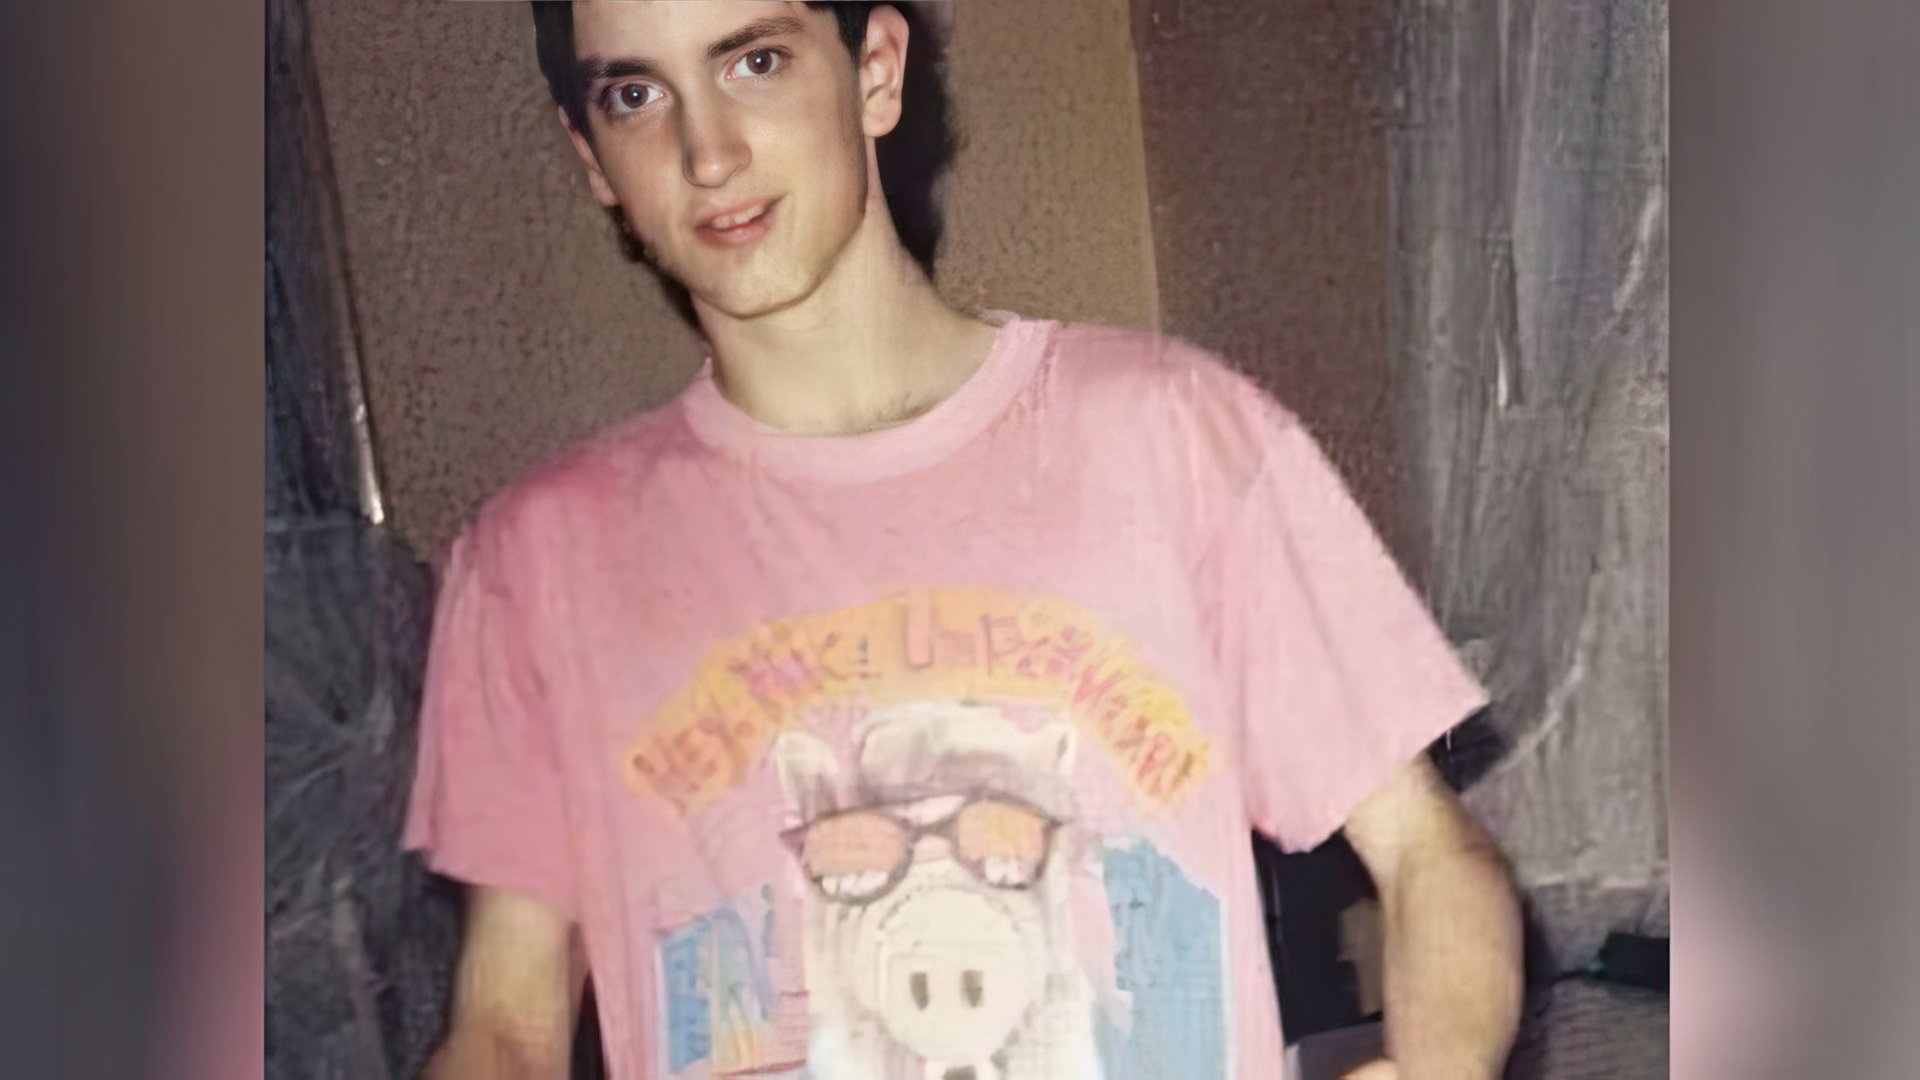 A very young Eminem